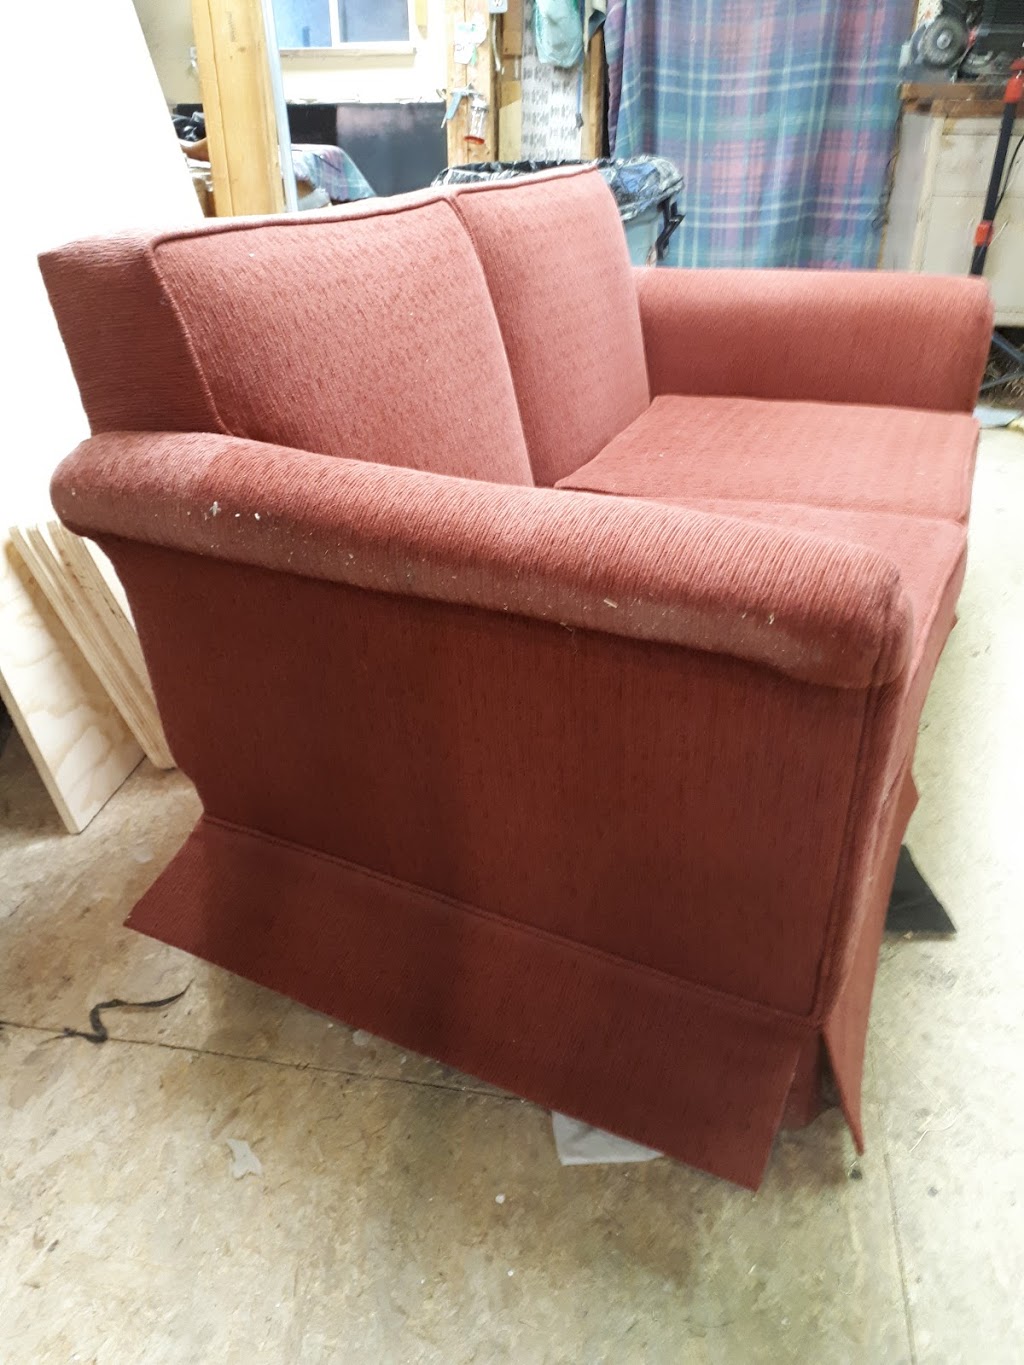 Custom Tailored Upholstery | furniture store | 4622 Old Simcoe St, Oshawa, ON L1H 7K4, Canada | 9056558856 OR +1 905-655-8856